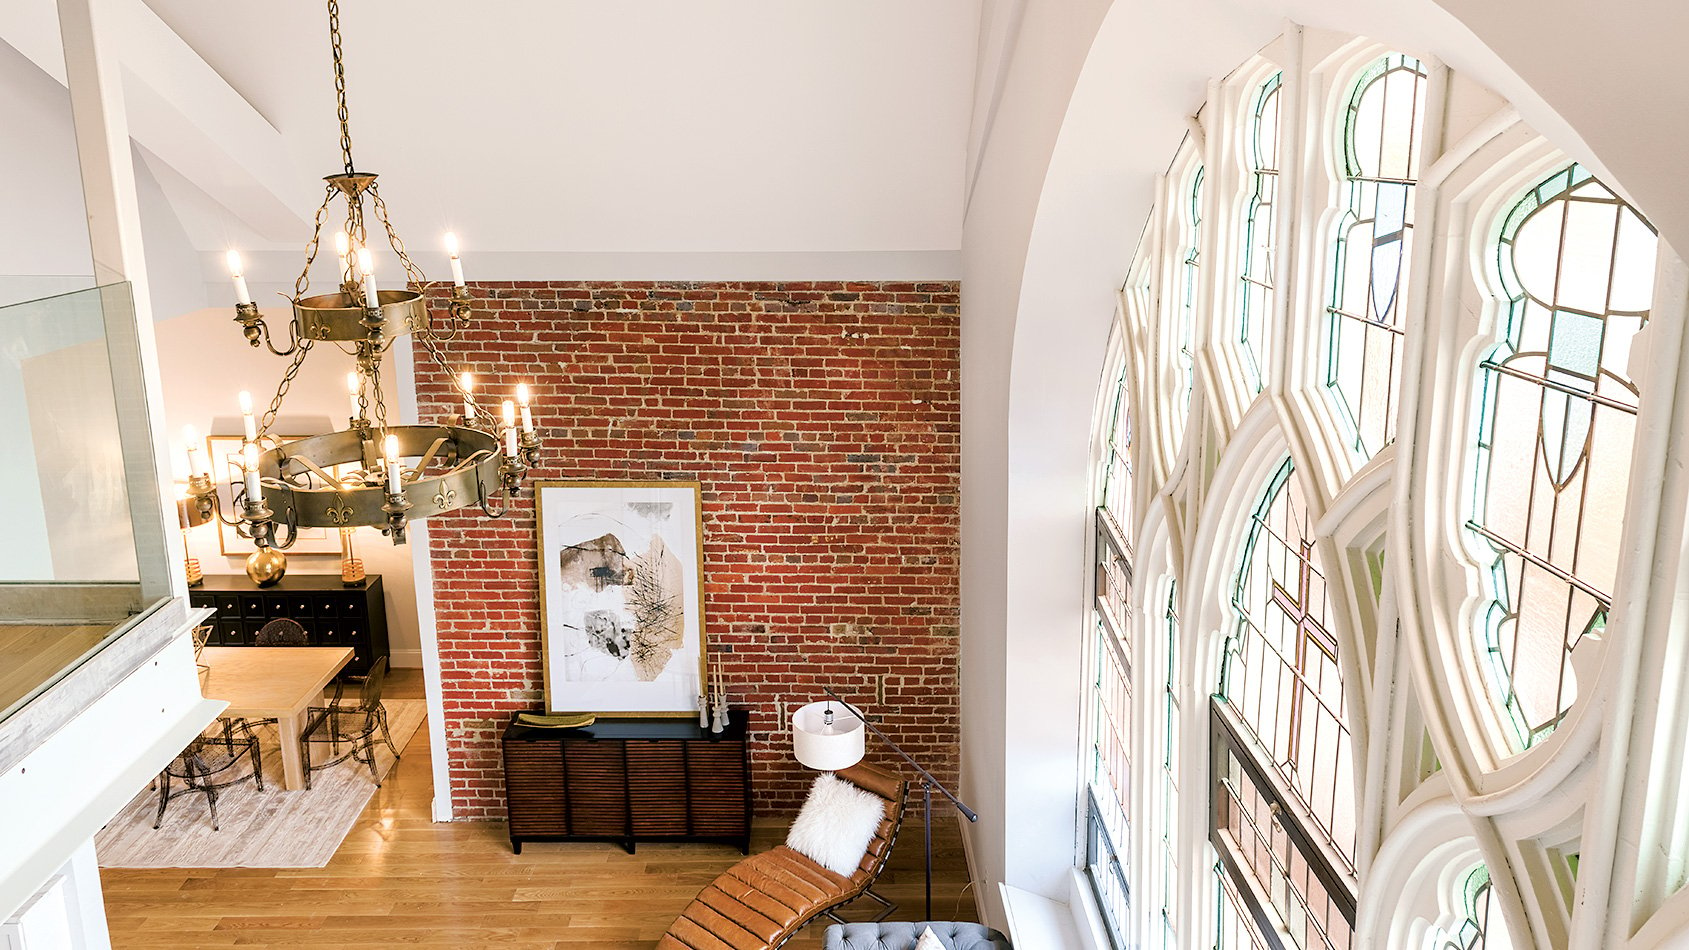 We Can’t Get Over the Windows In This Converted-Church Condo